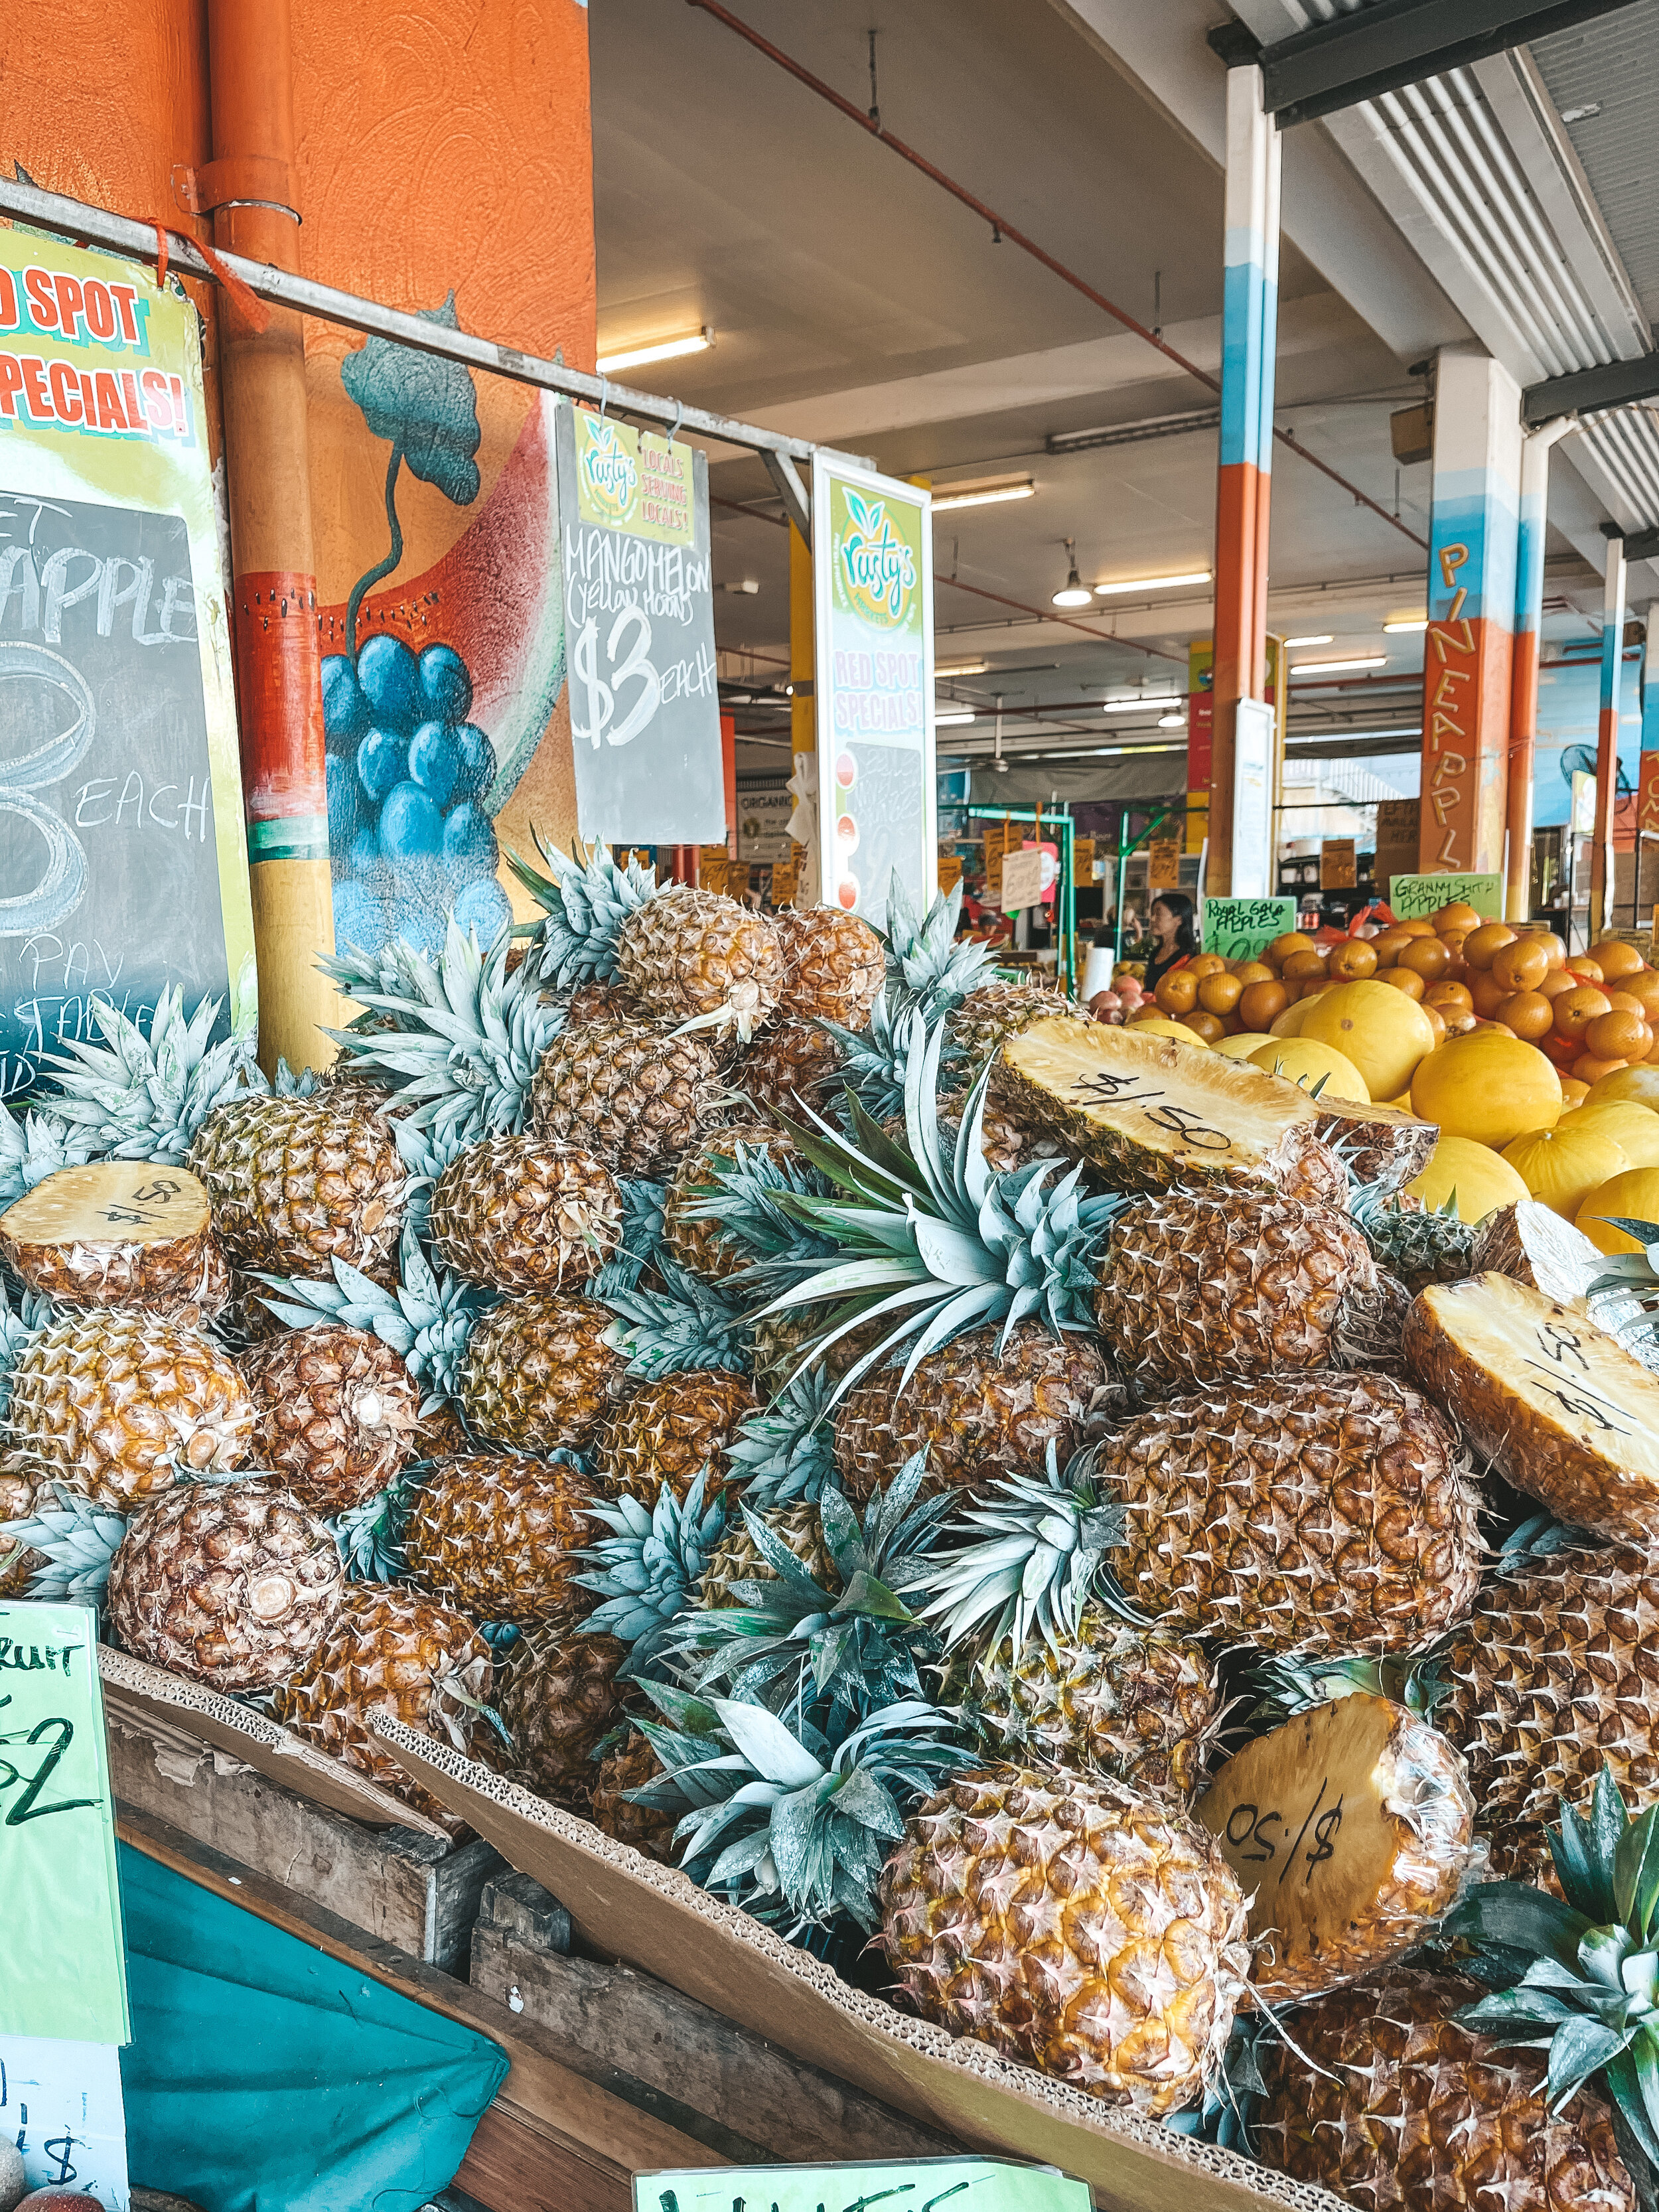 Pile of pineapple at Rusty's Market - Cairns - Tropical North Queensland (QLD) - Australia